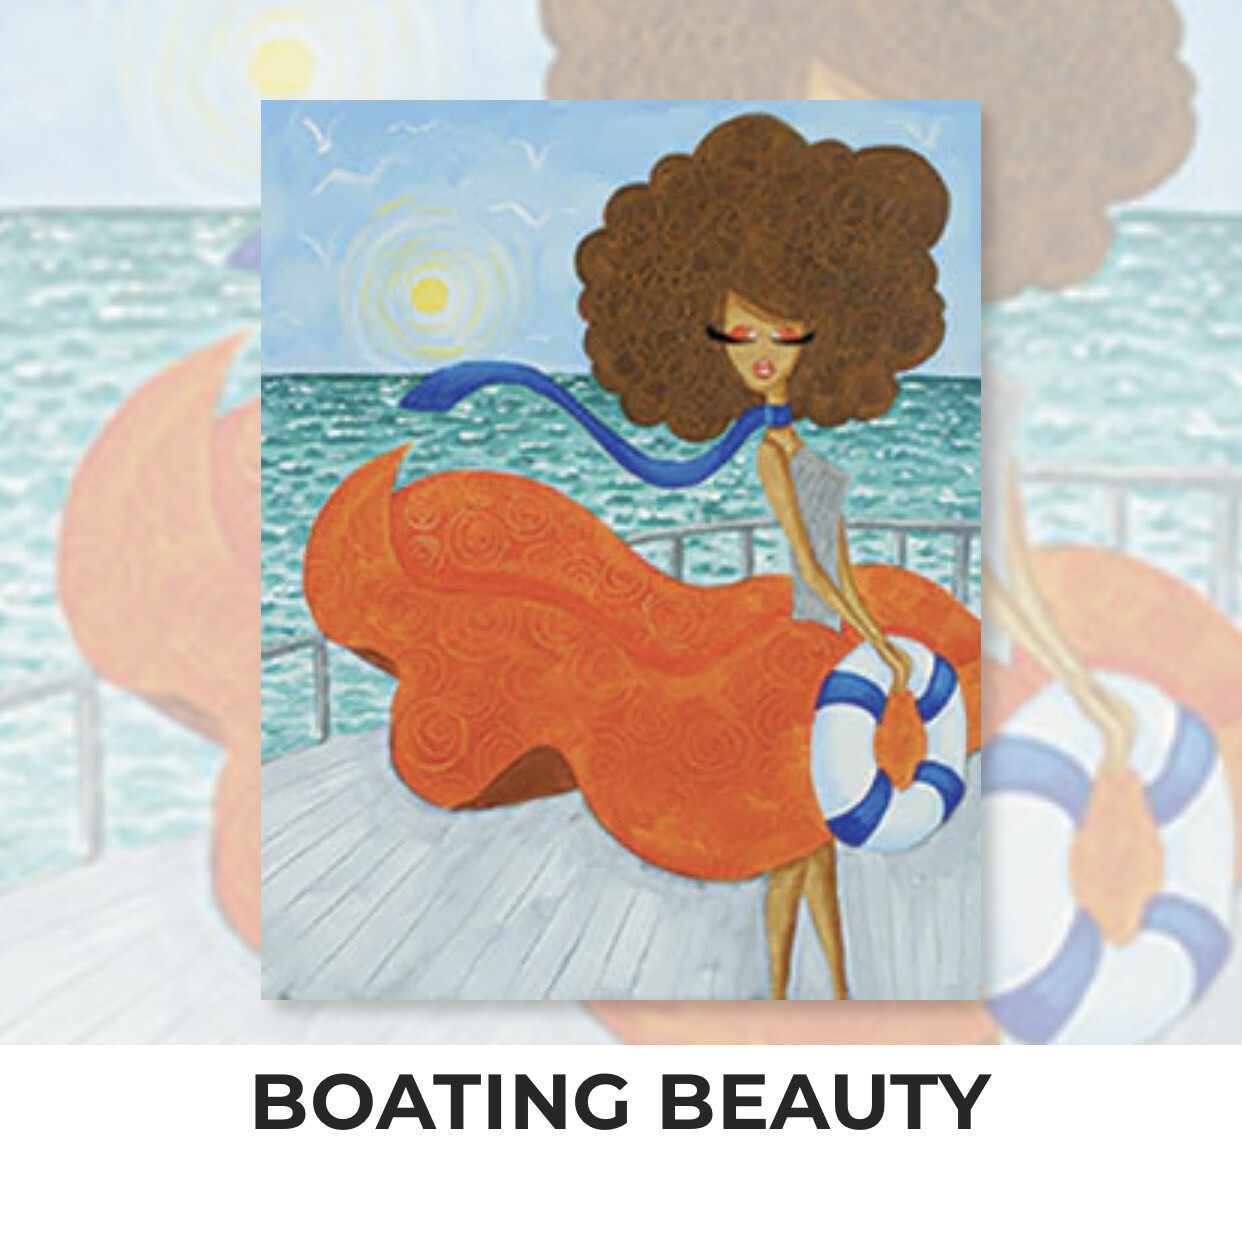 Boating Beauty ADULT Acrylic Paint On Canvas DIY Art Kit - 3 Week Special Order